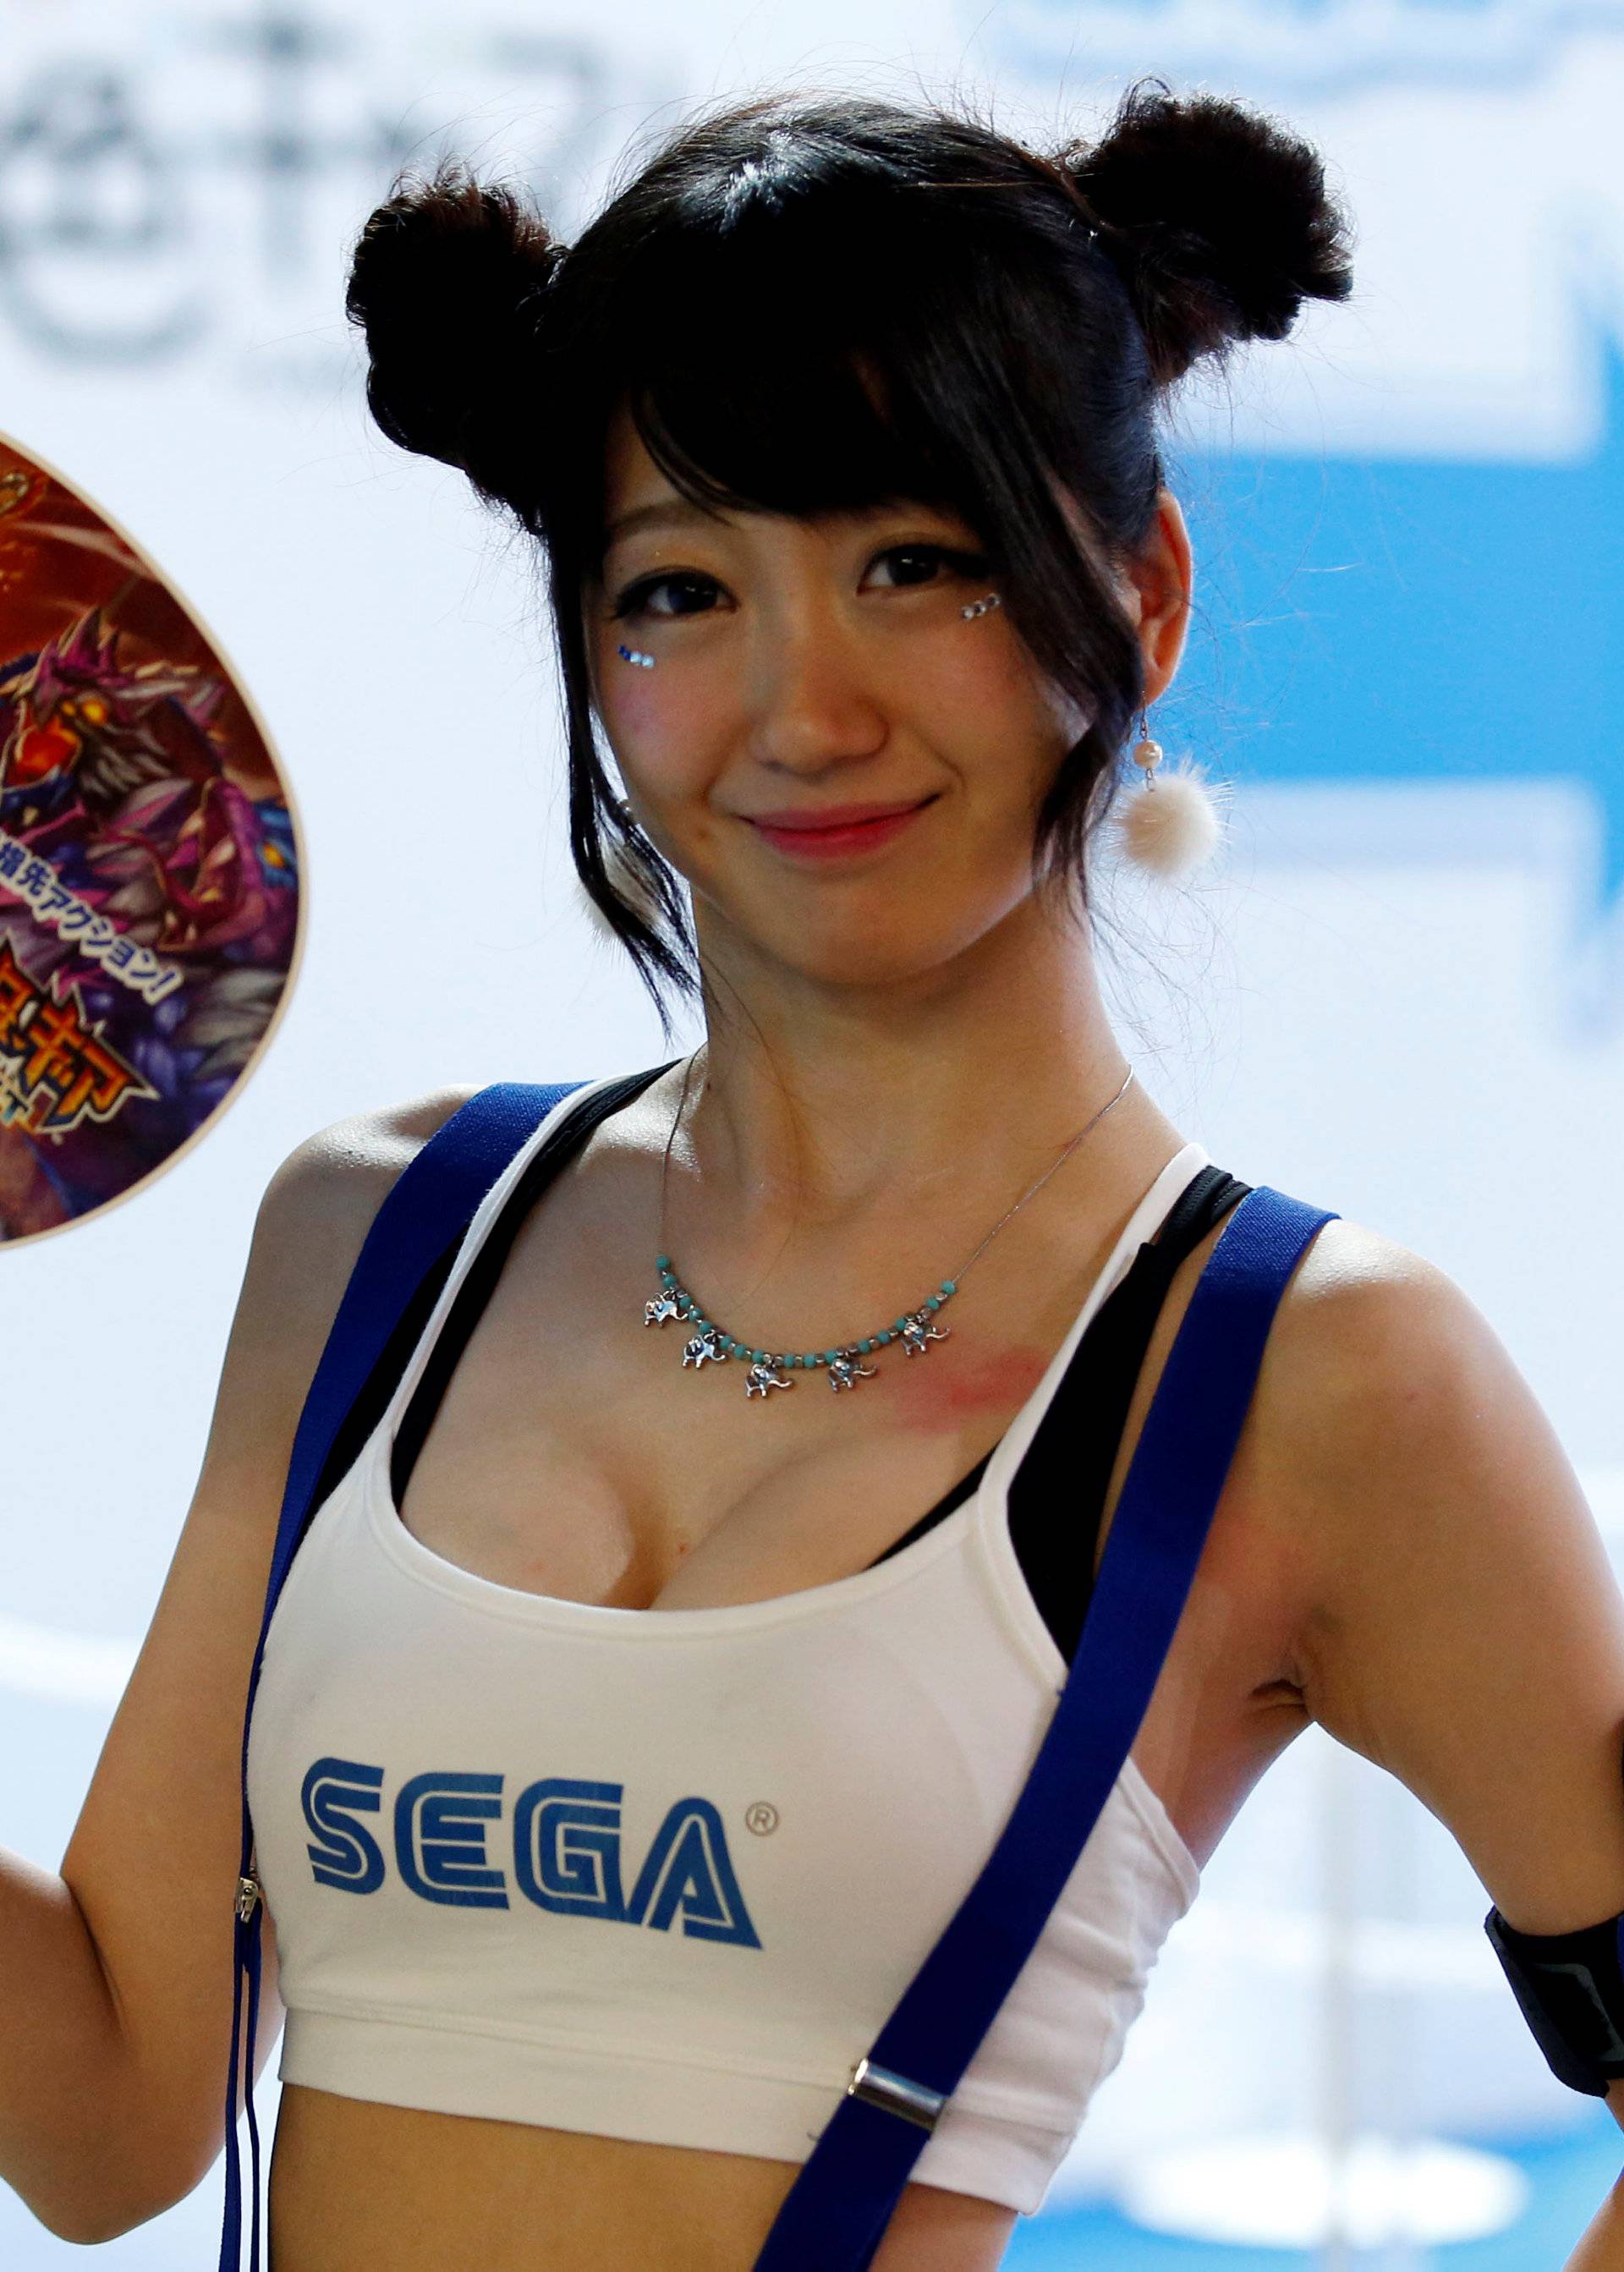 Sega's hostess poses for photographers at Tokyo Game Show 2016 in Chiba